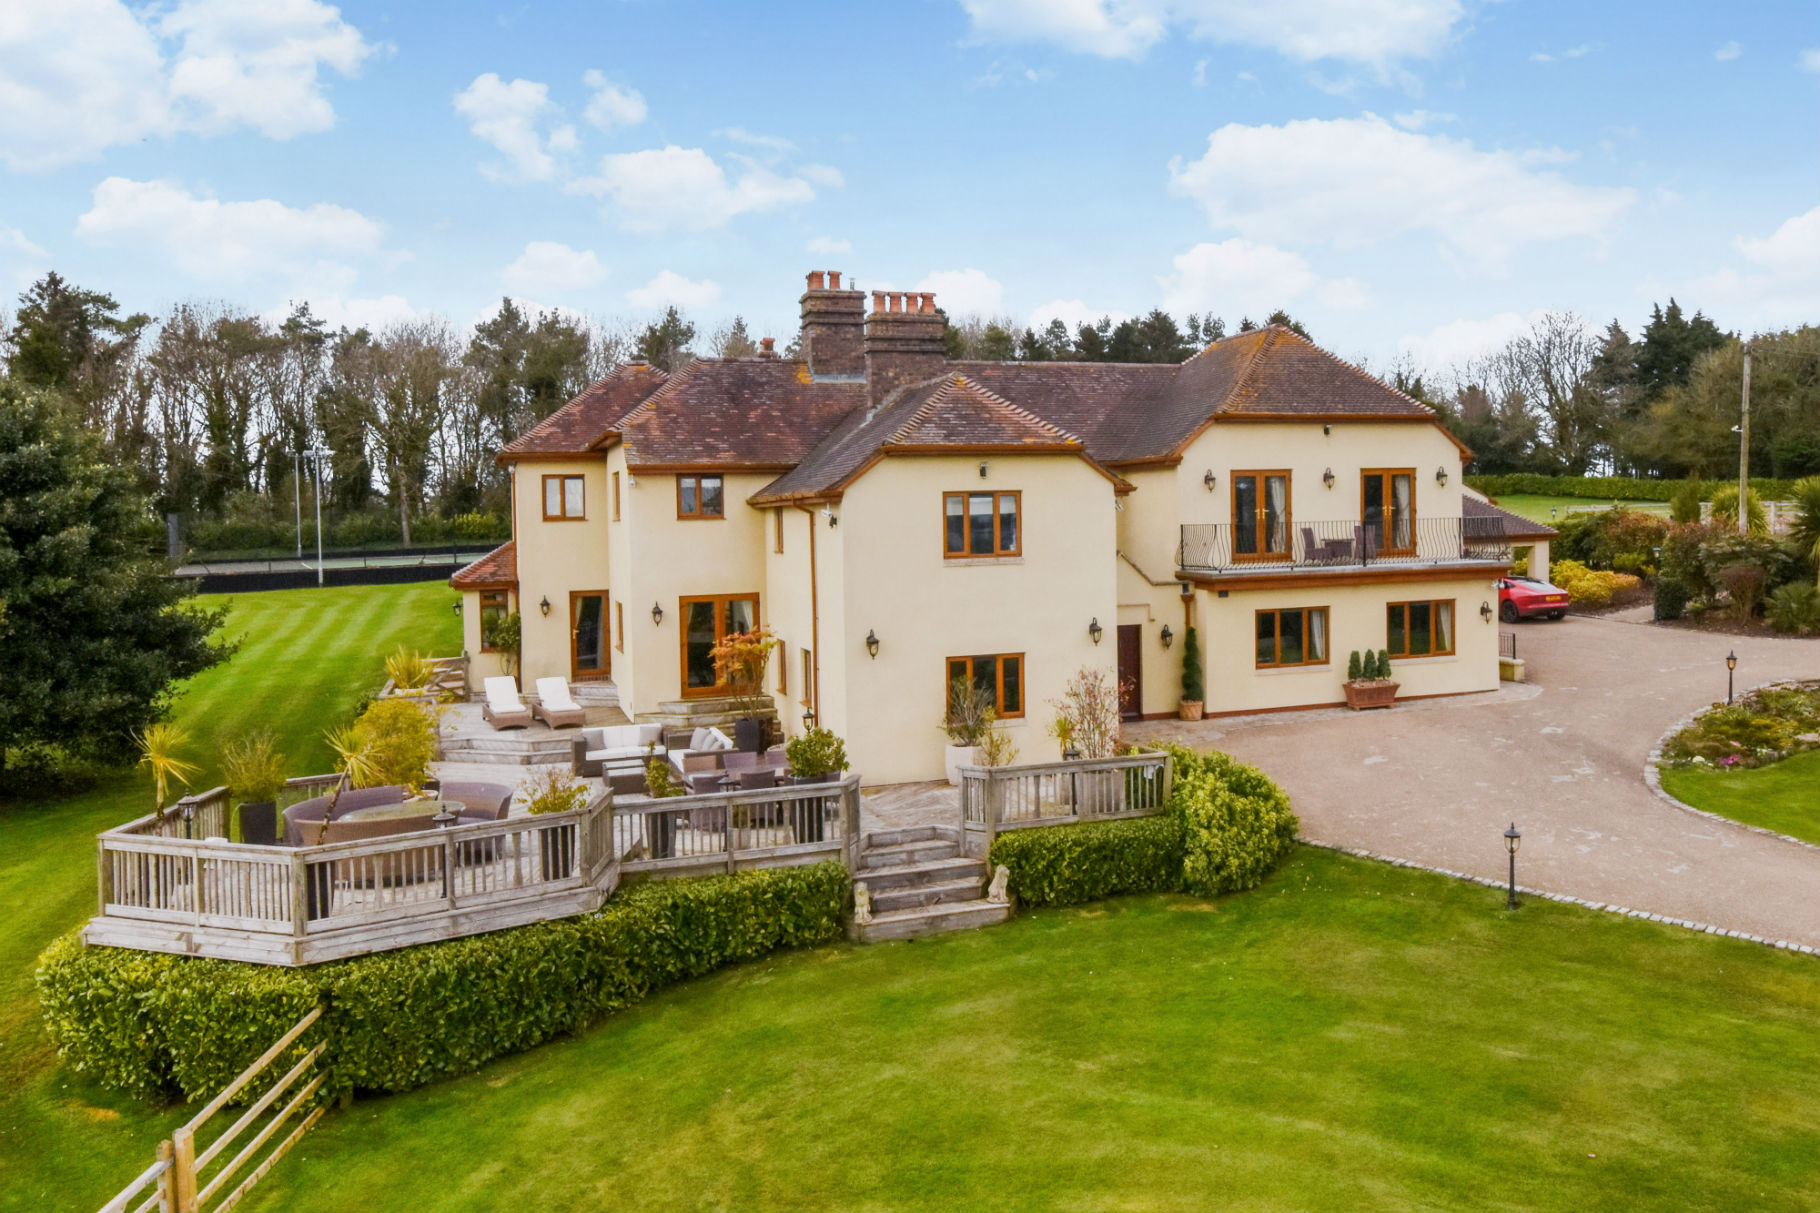 Is this Backwell mansion worth moving out West for? We certainly think so...